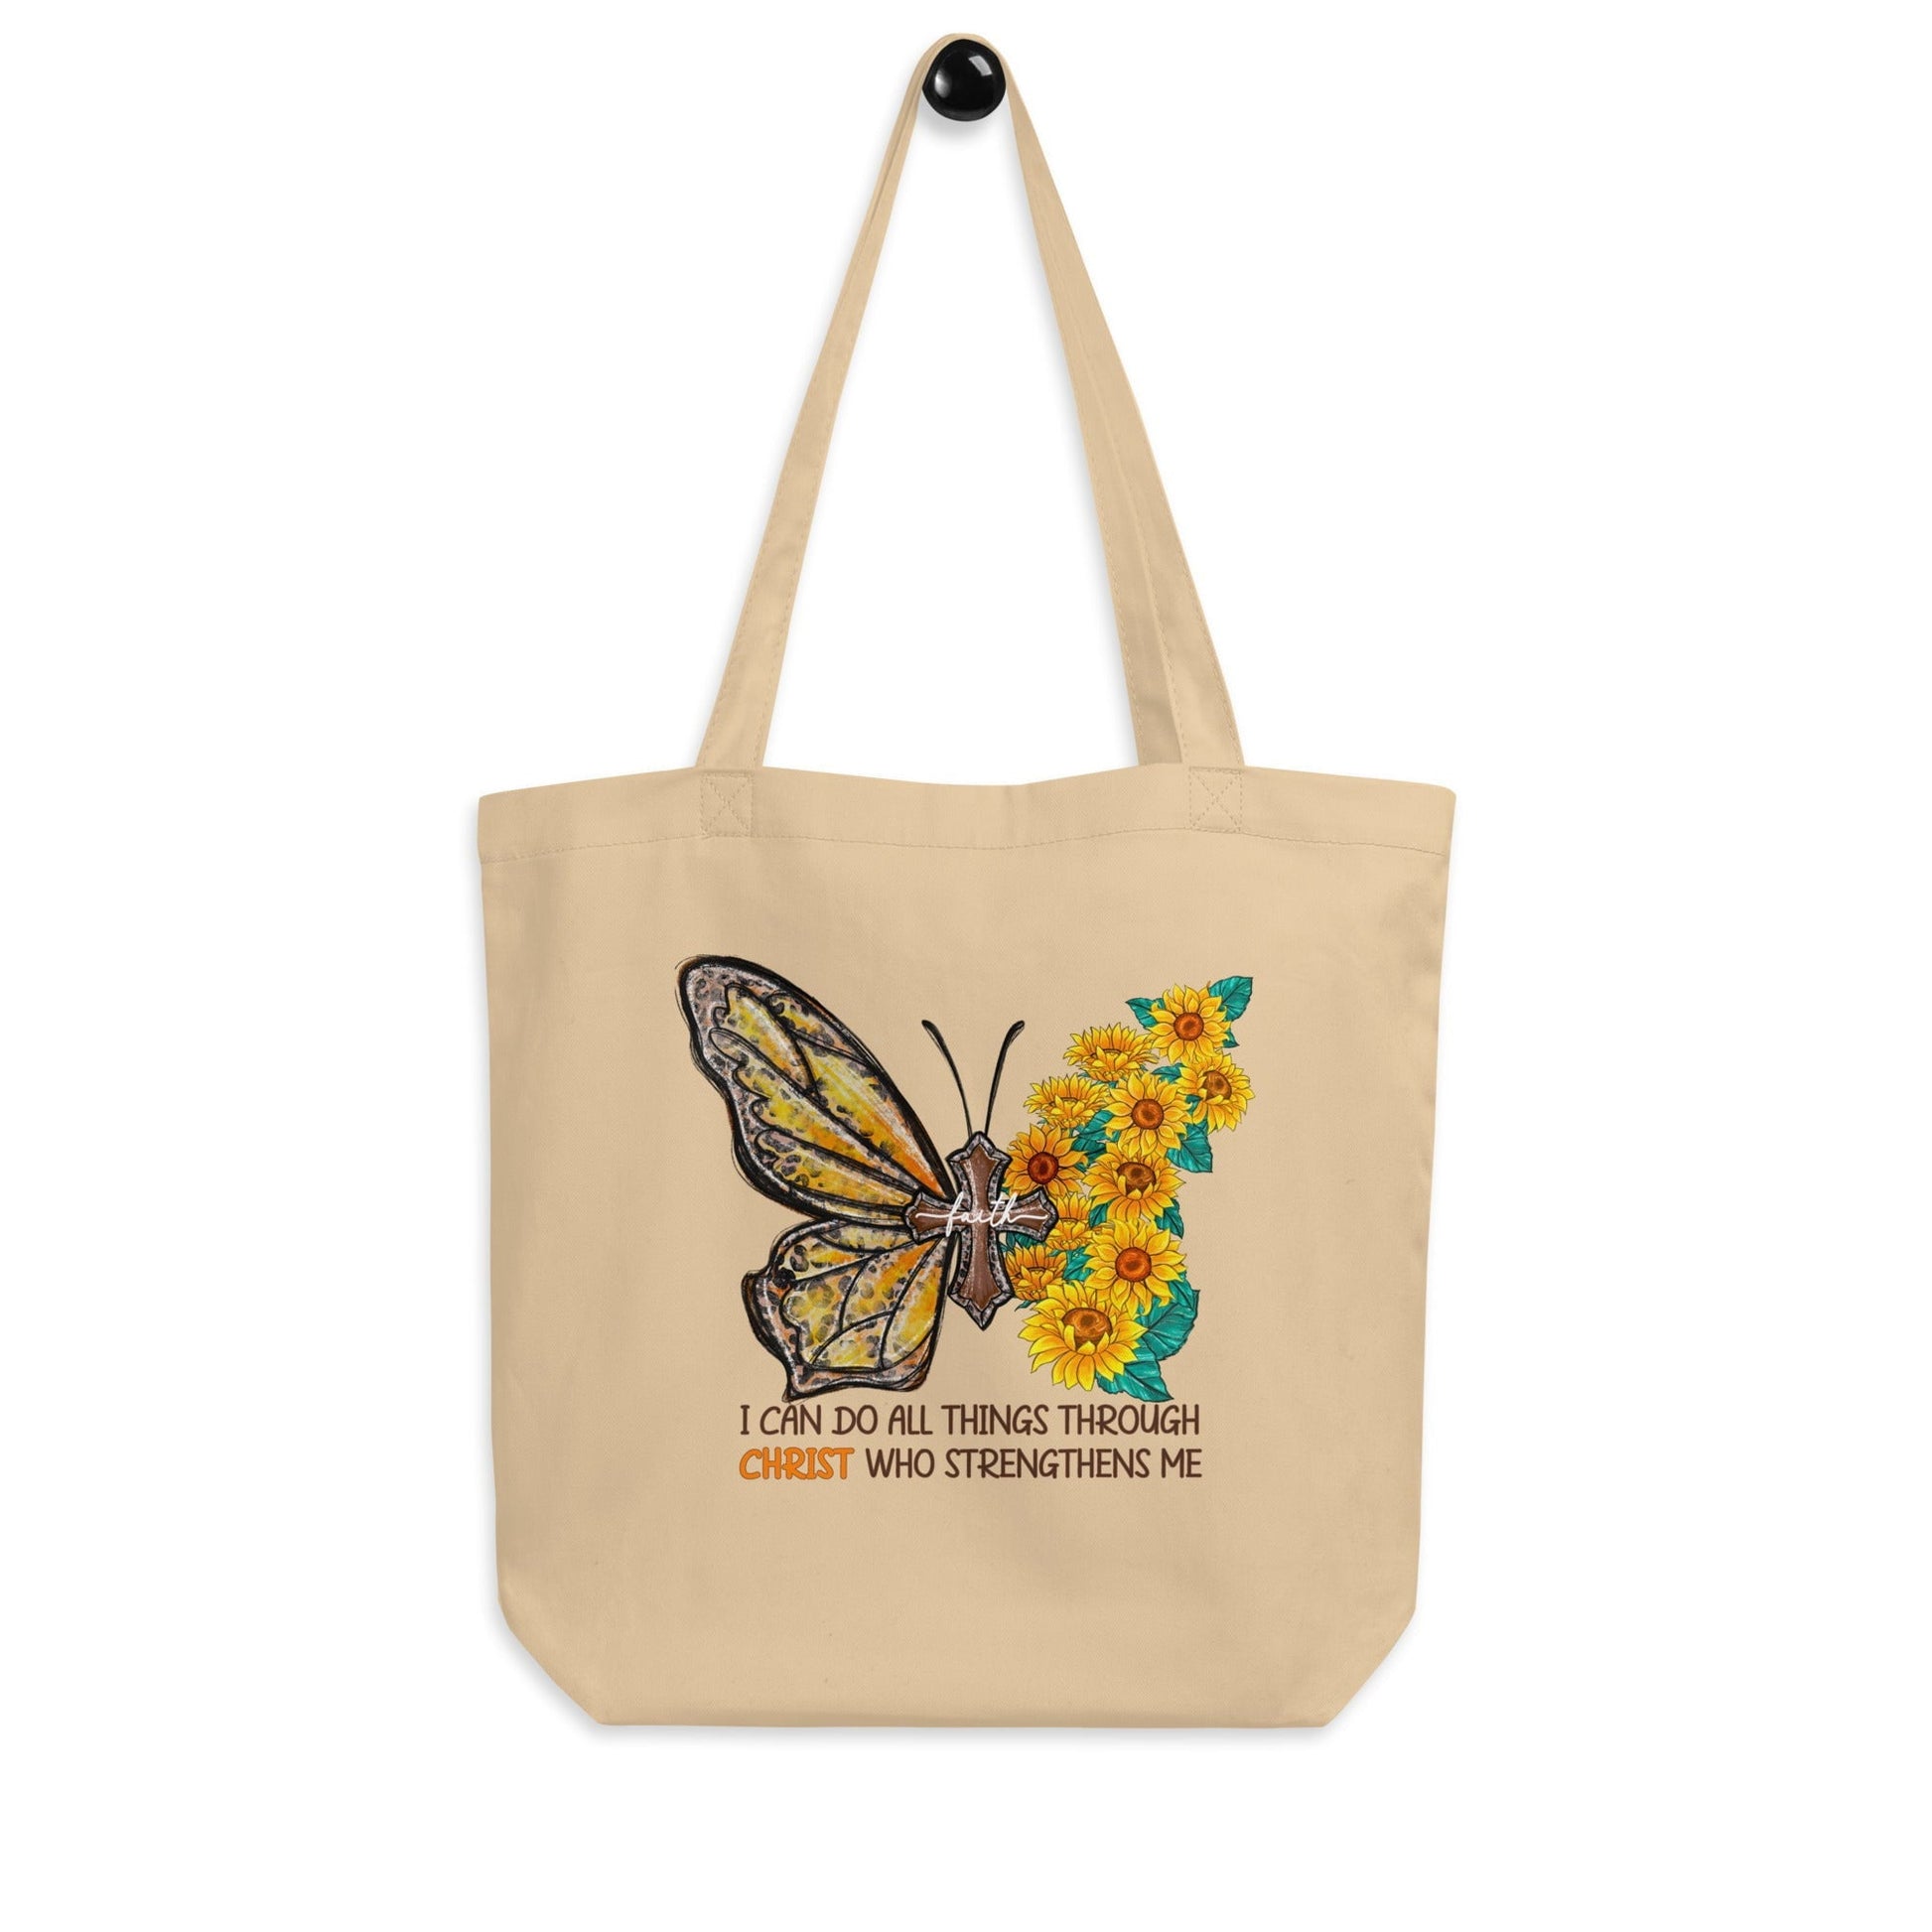 I Can do all things through Christ Tote Bag